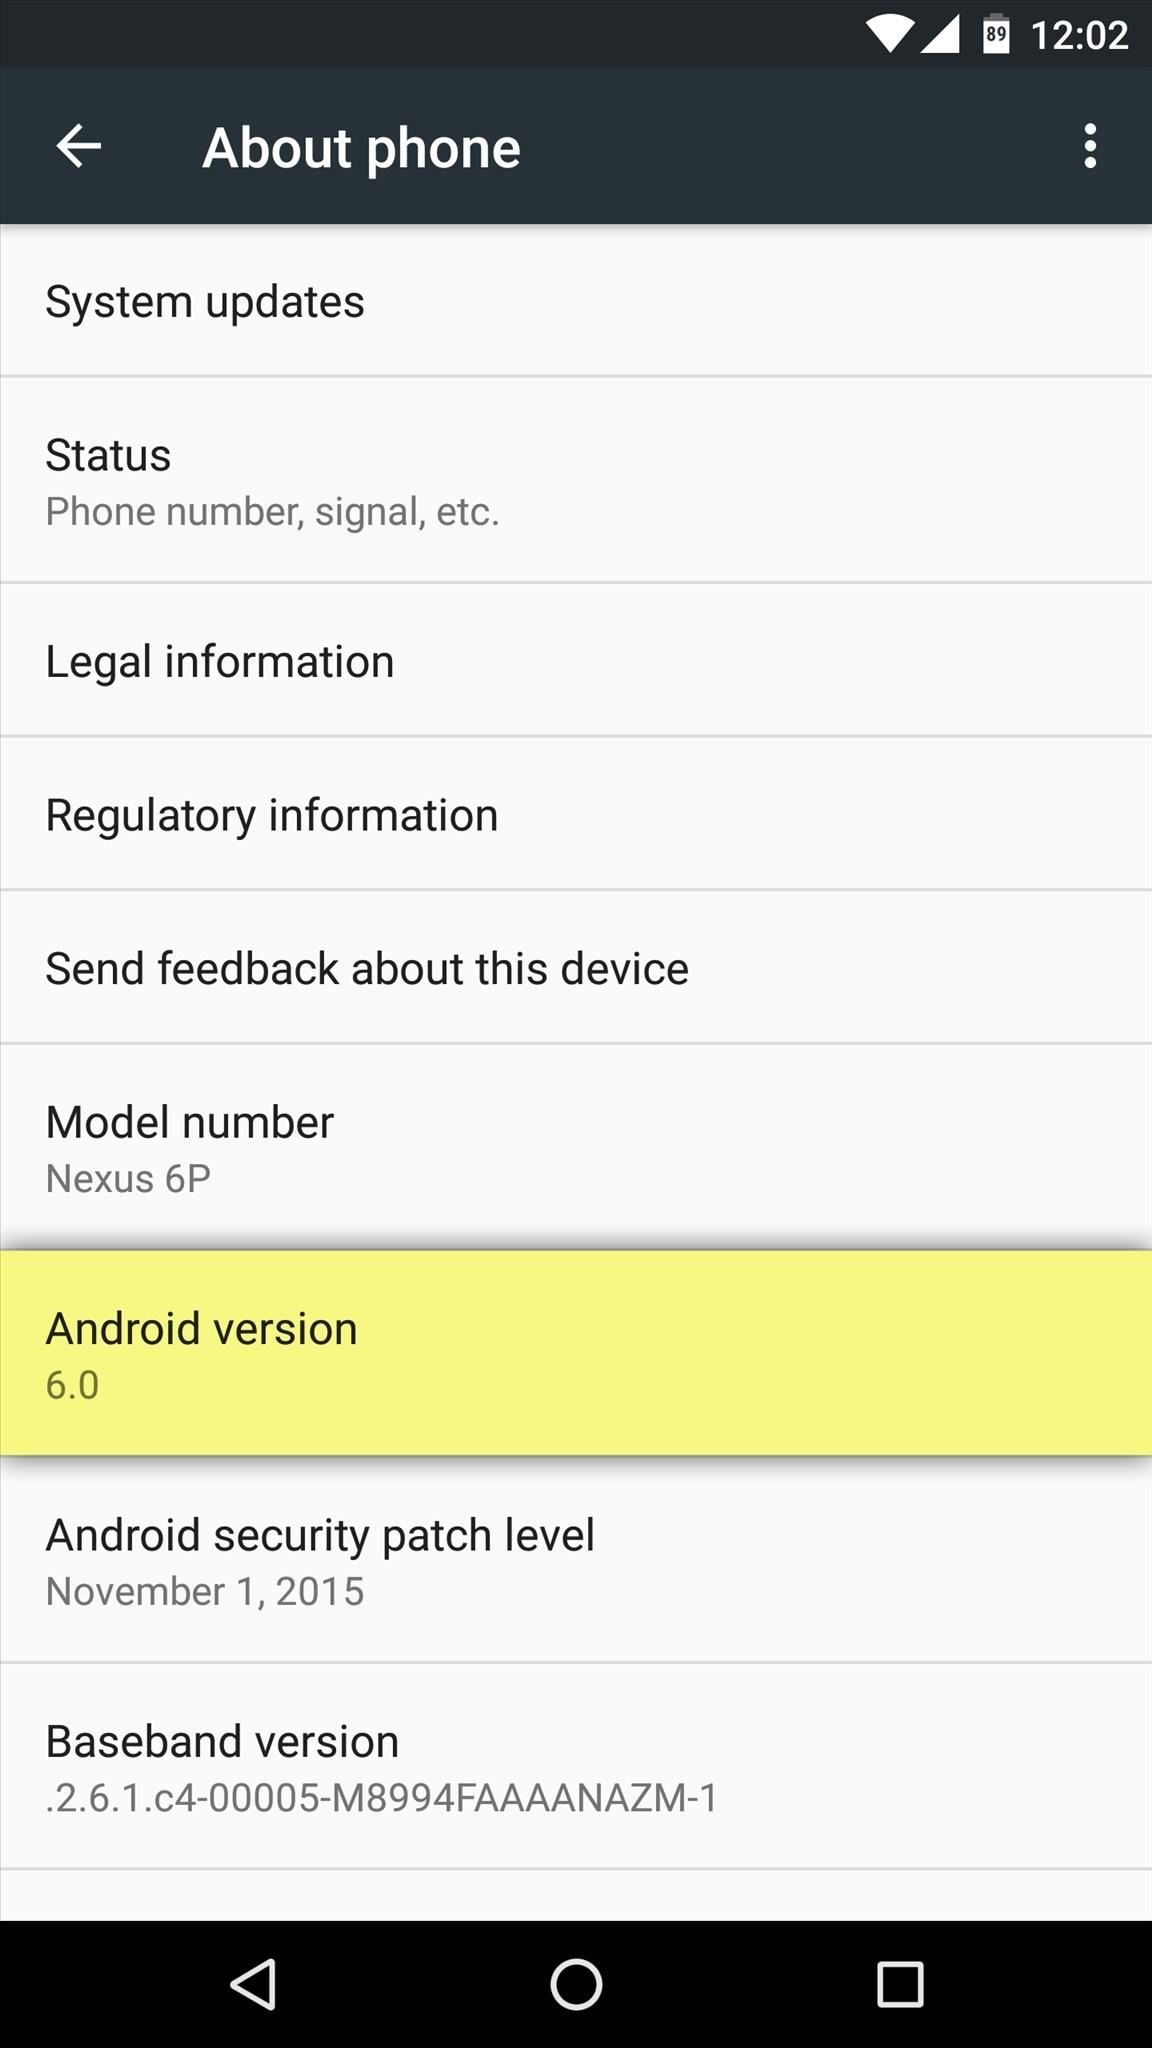 Android Basics: How to Tell What Android Version & Build Number You Have